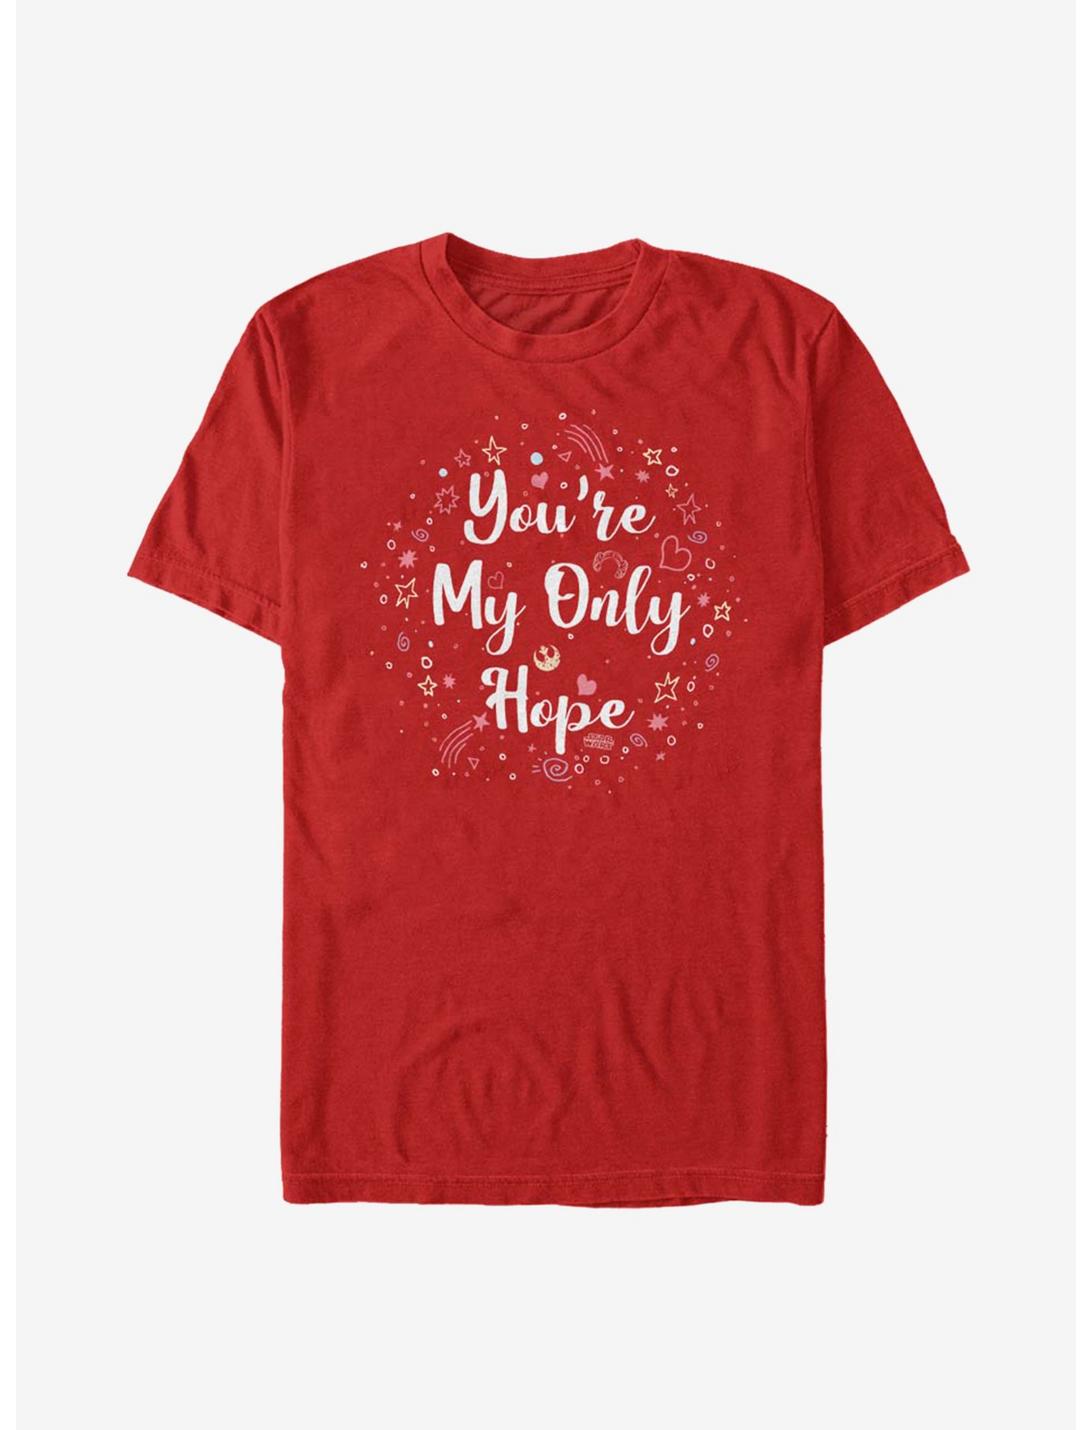 Star Wars Only Hope T-Shirt, RED, hi-res